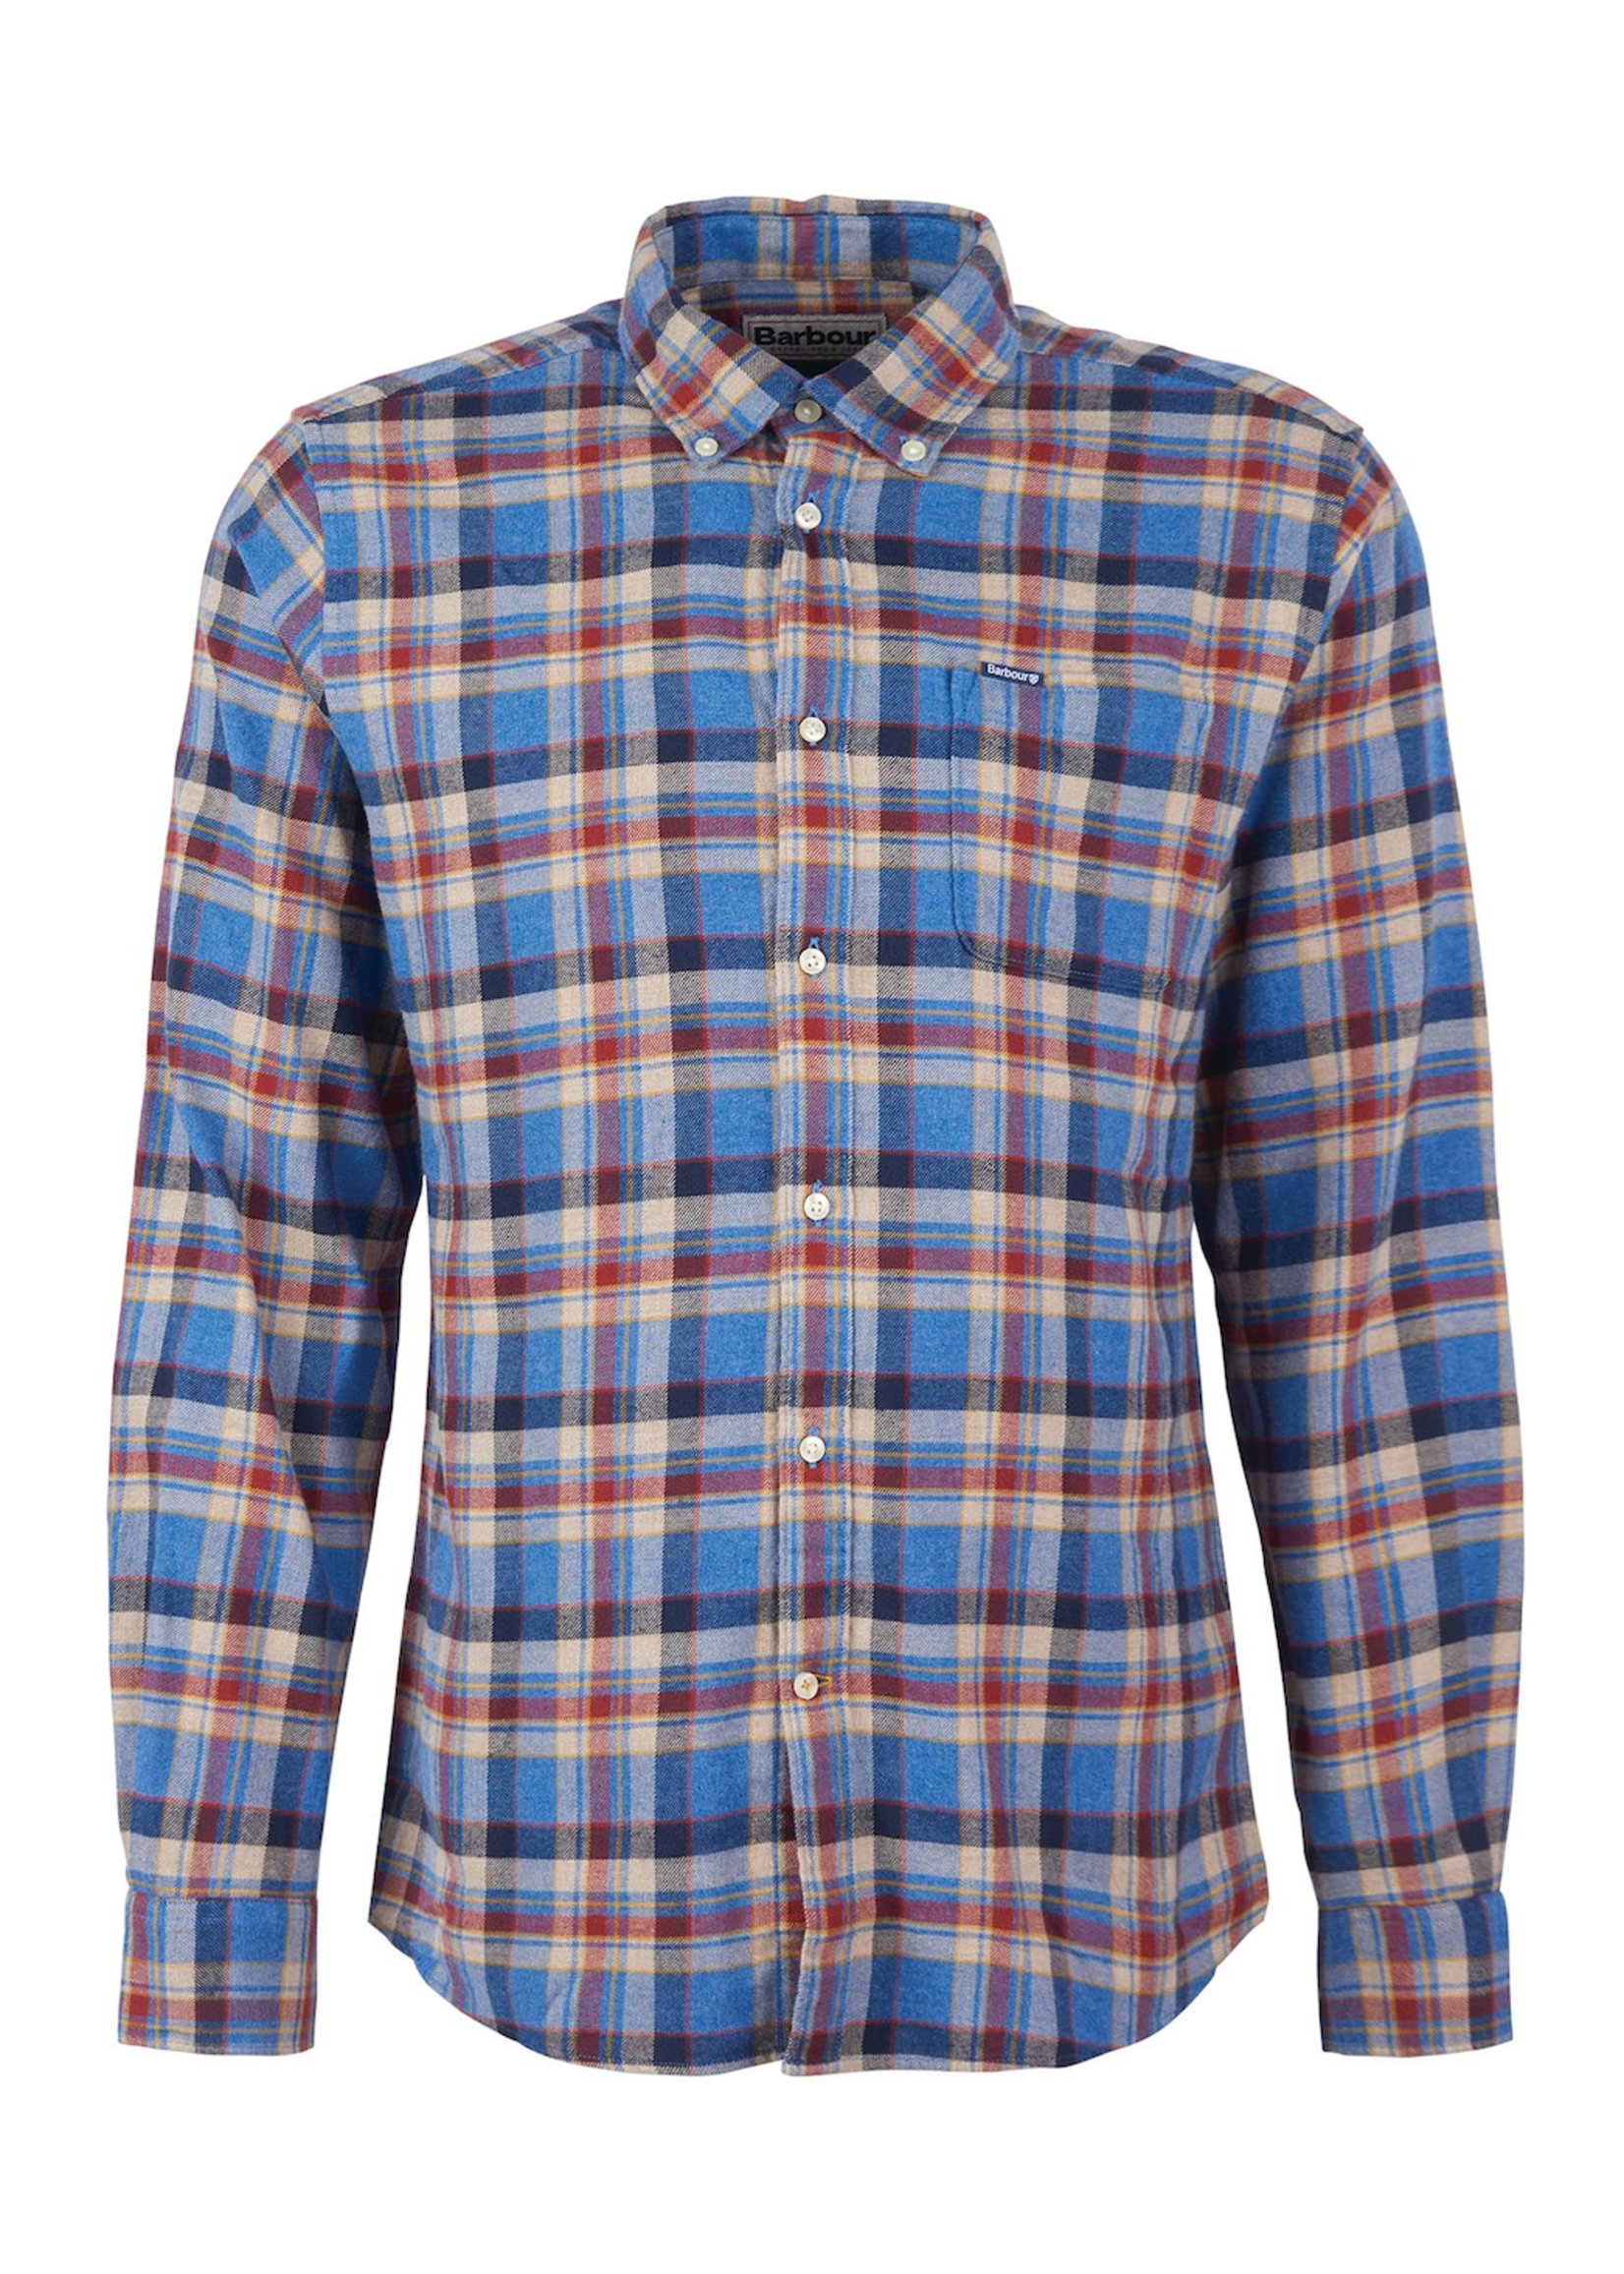 Barbour Barbour Holystone Tailored Fit Shirt